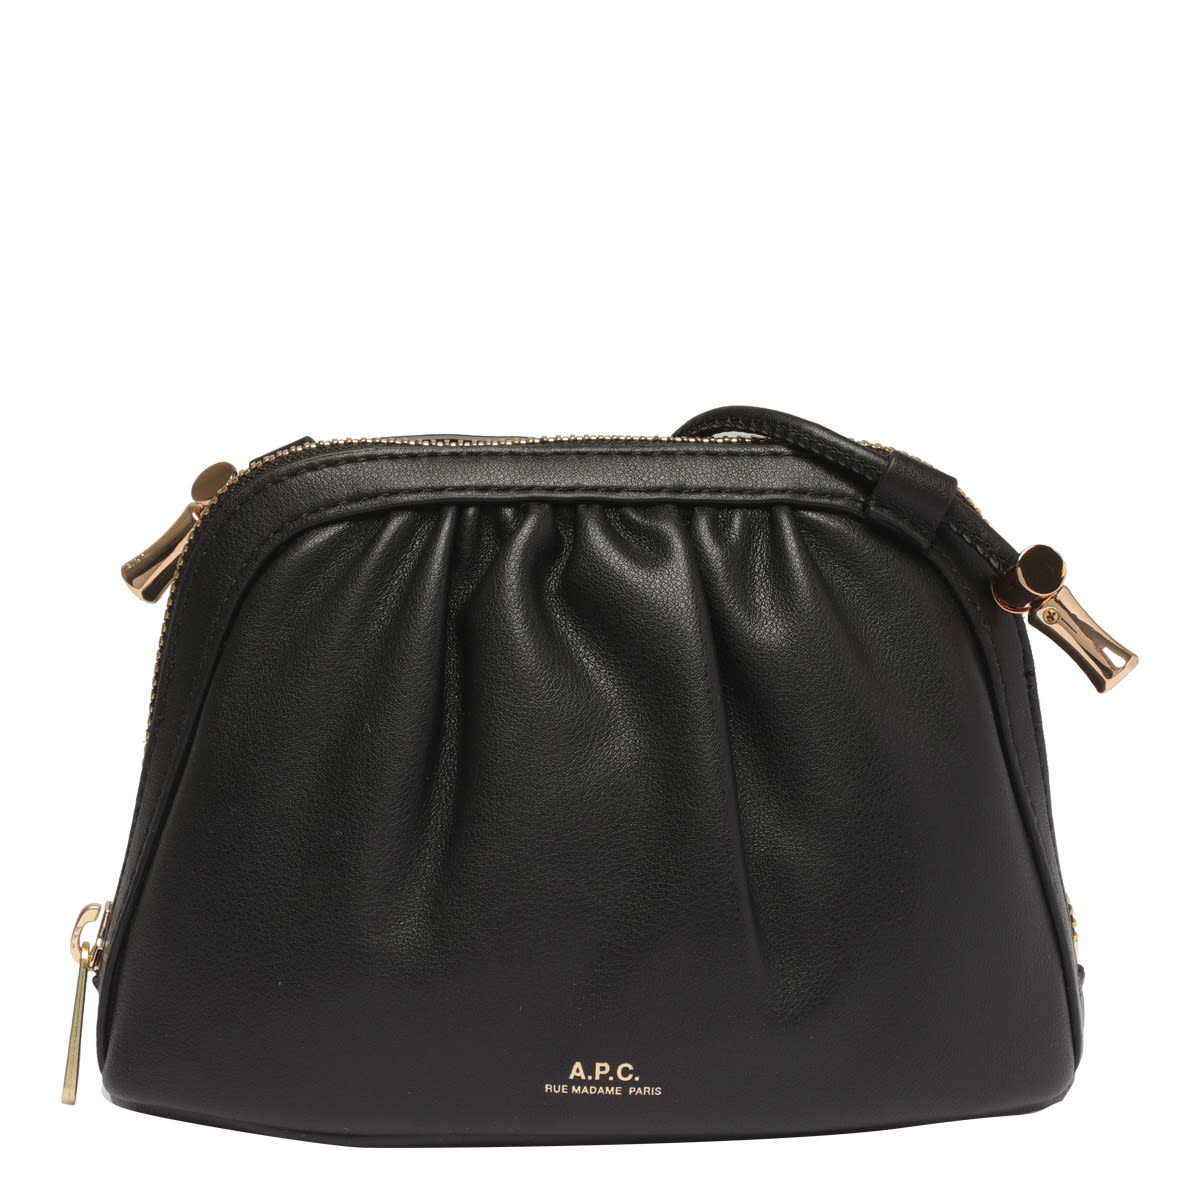 Green Grace Baguette Bag by A.P.C. Accessories for $20